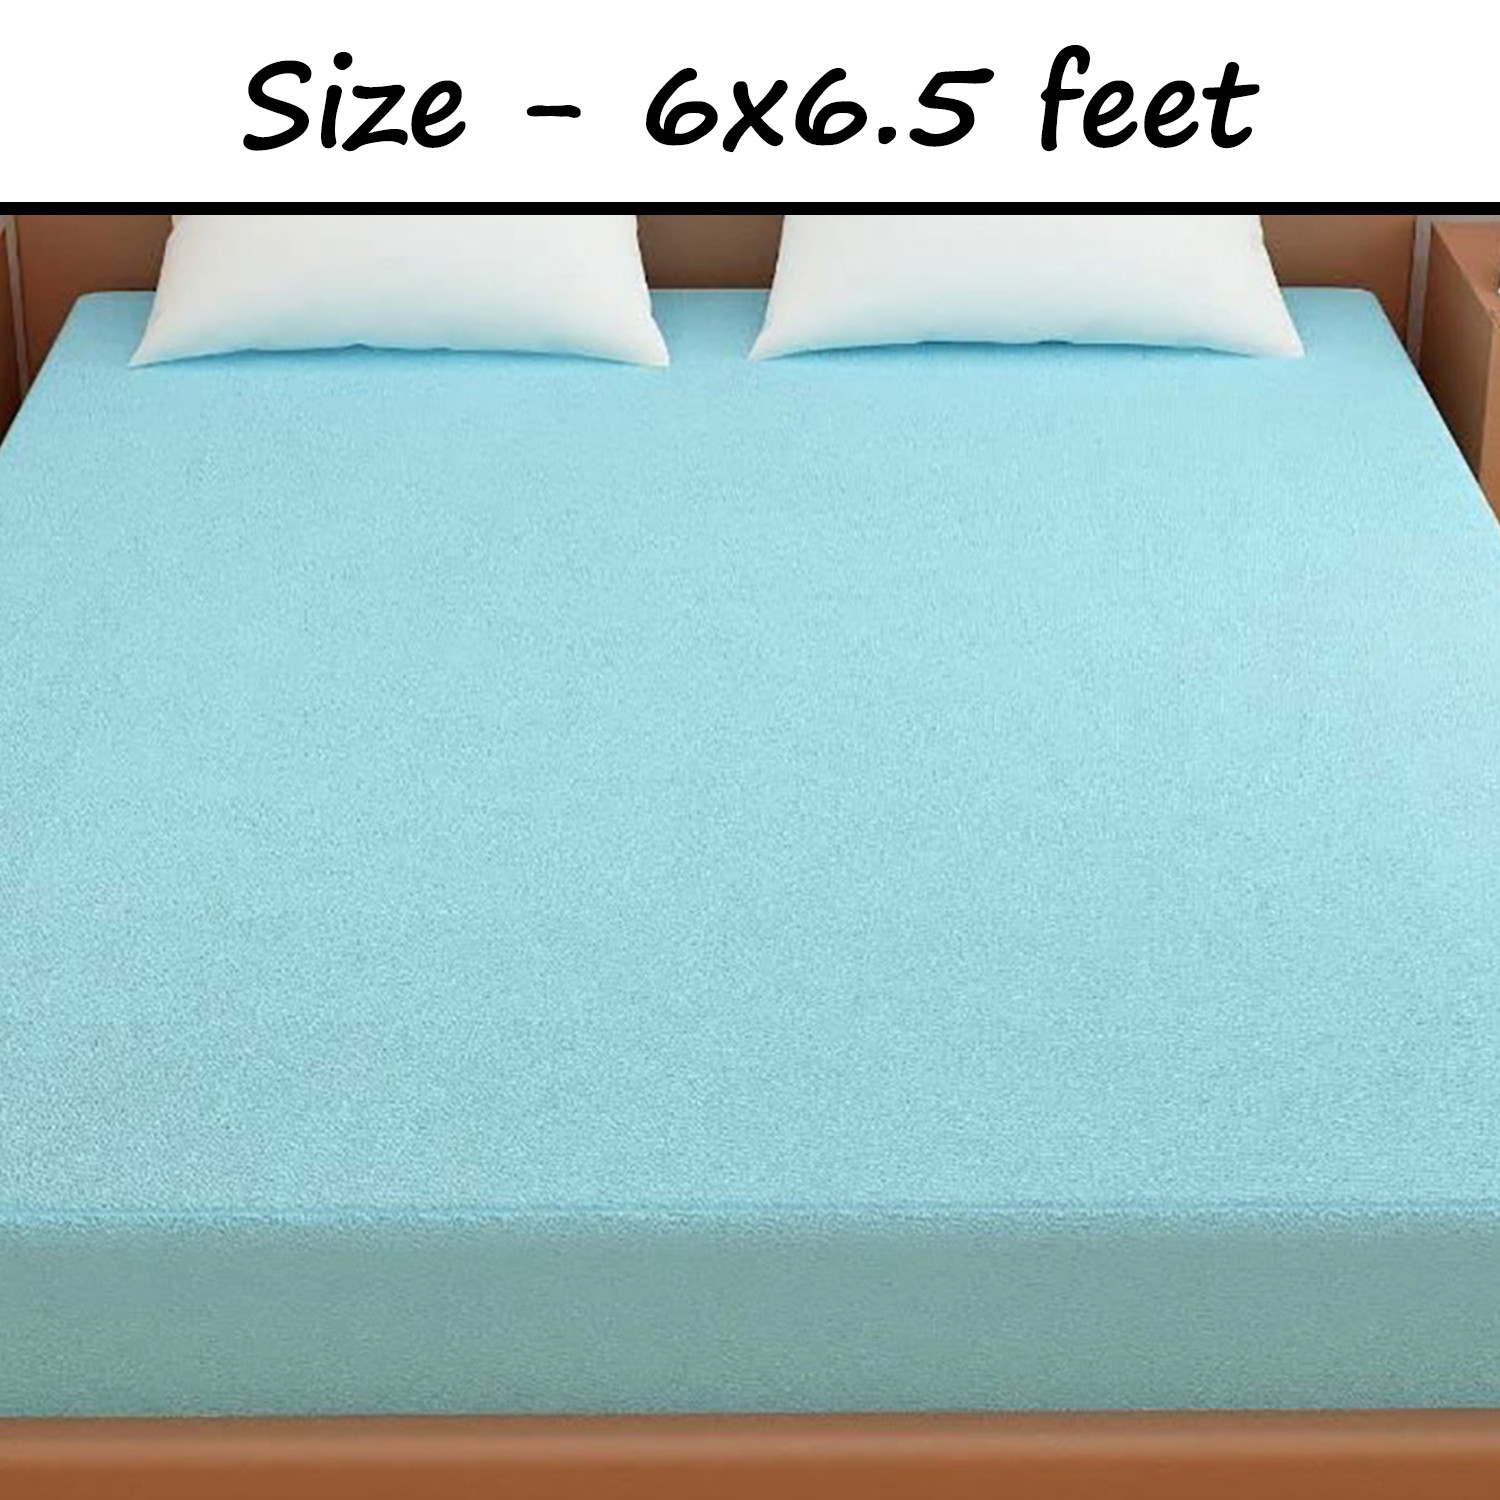 Kuber Industries Waterproof Double Bed Mattress Cover|Breathable Terry Cotton Surface & Elastic Fitted Mattress Protector,6 x 6.5 Ft. (Sky Blue)